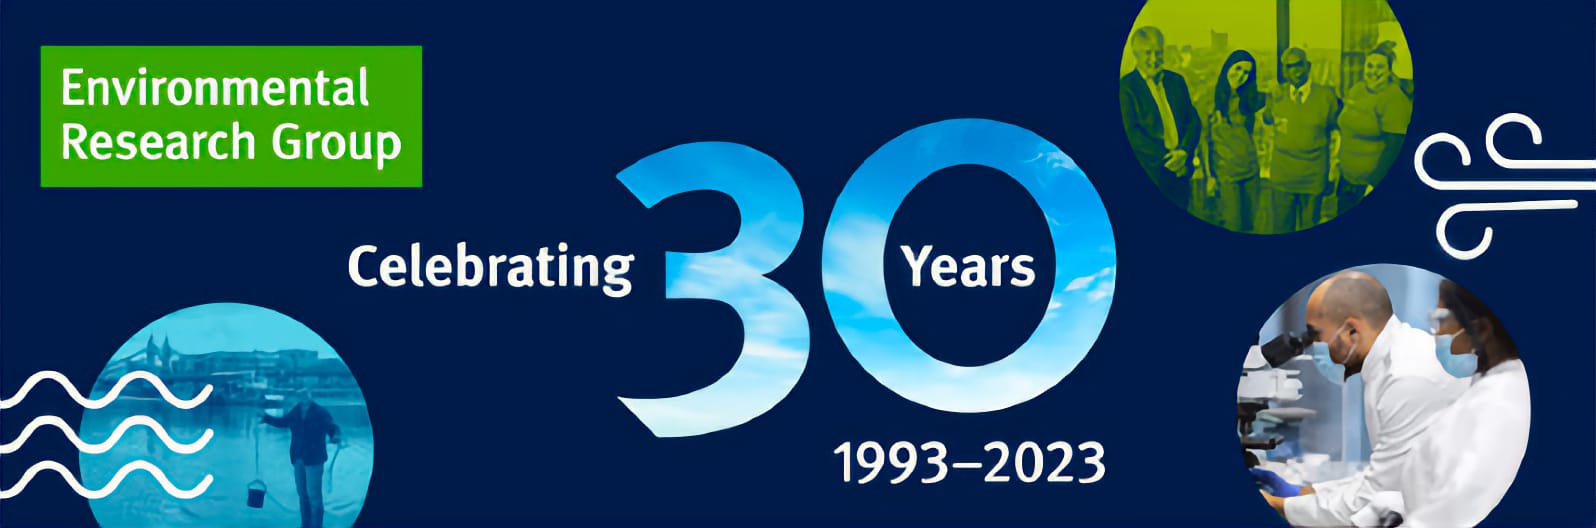 Environmental research Group - Celebrating 30 Years